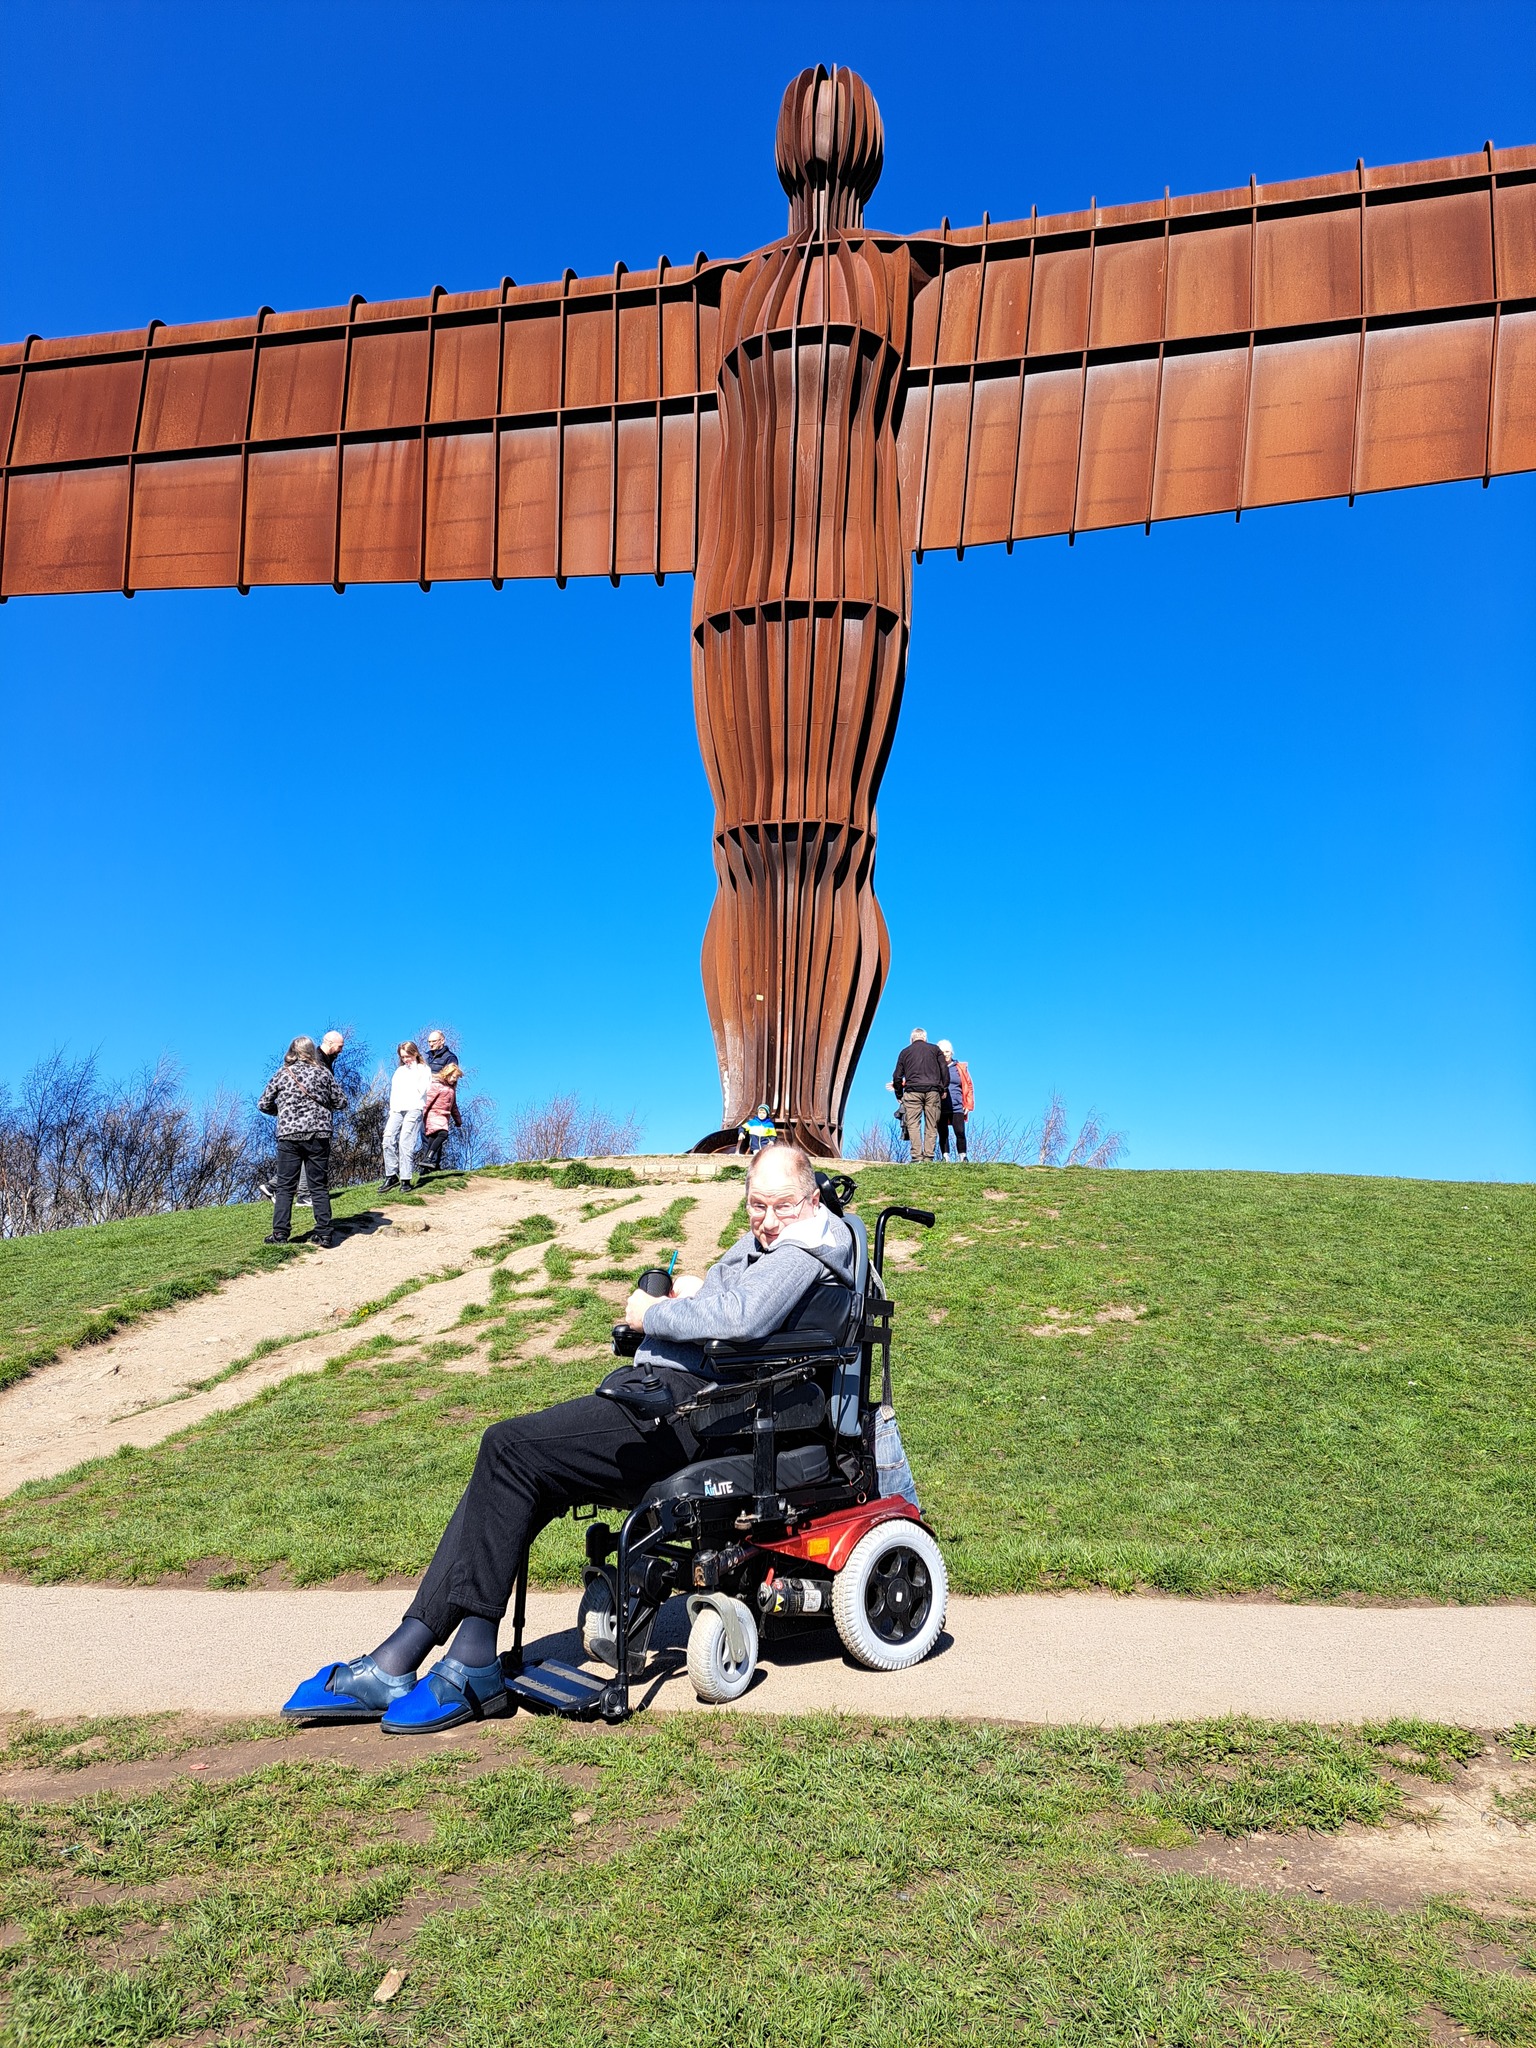 Our Angel of the North